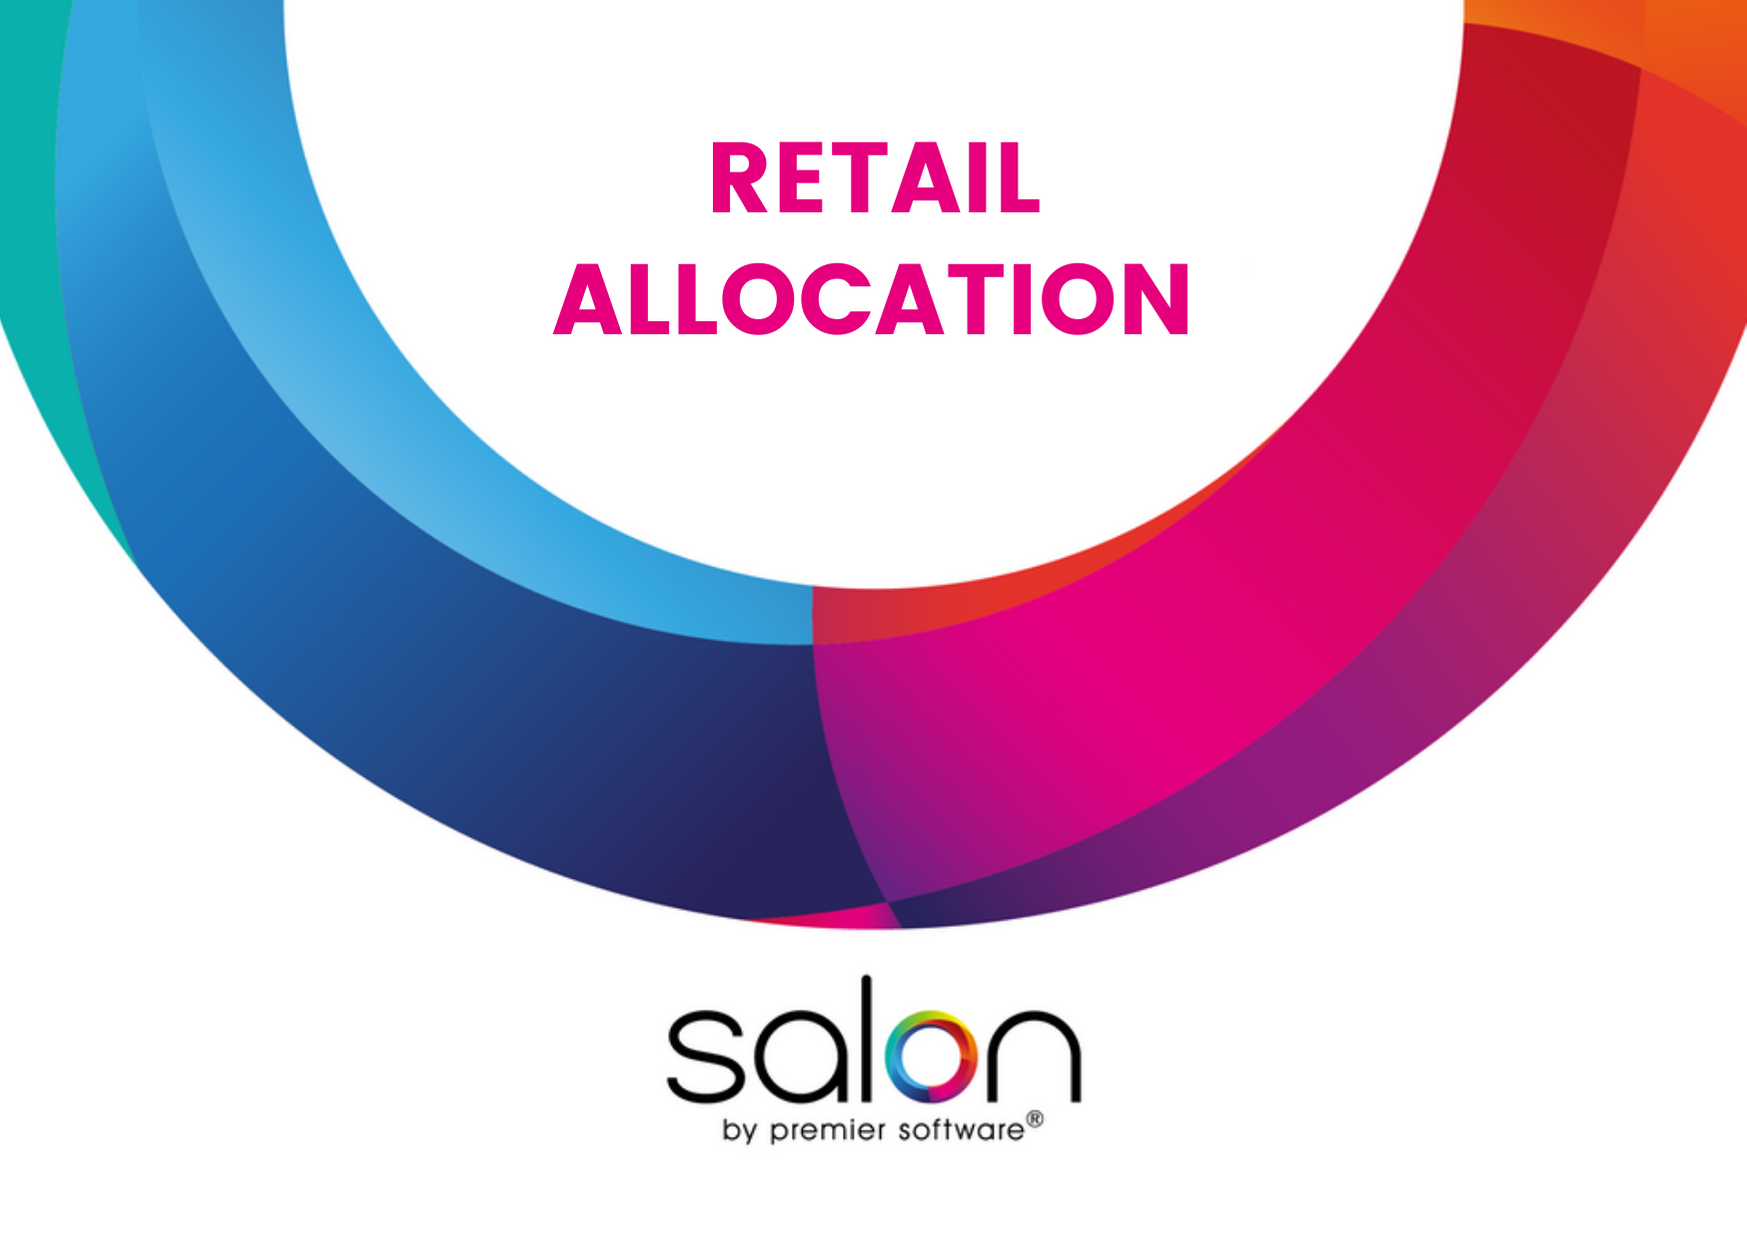 Did Your Know Salon - Retail Allocation